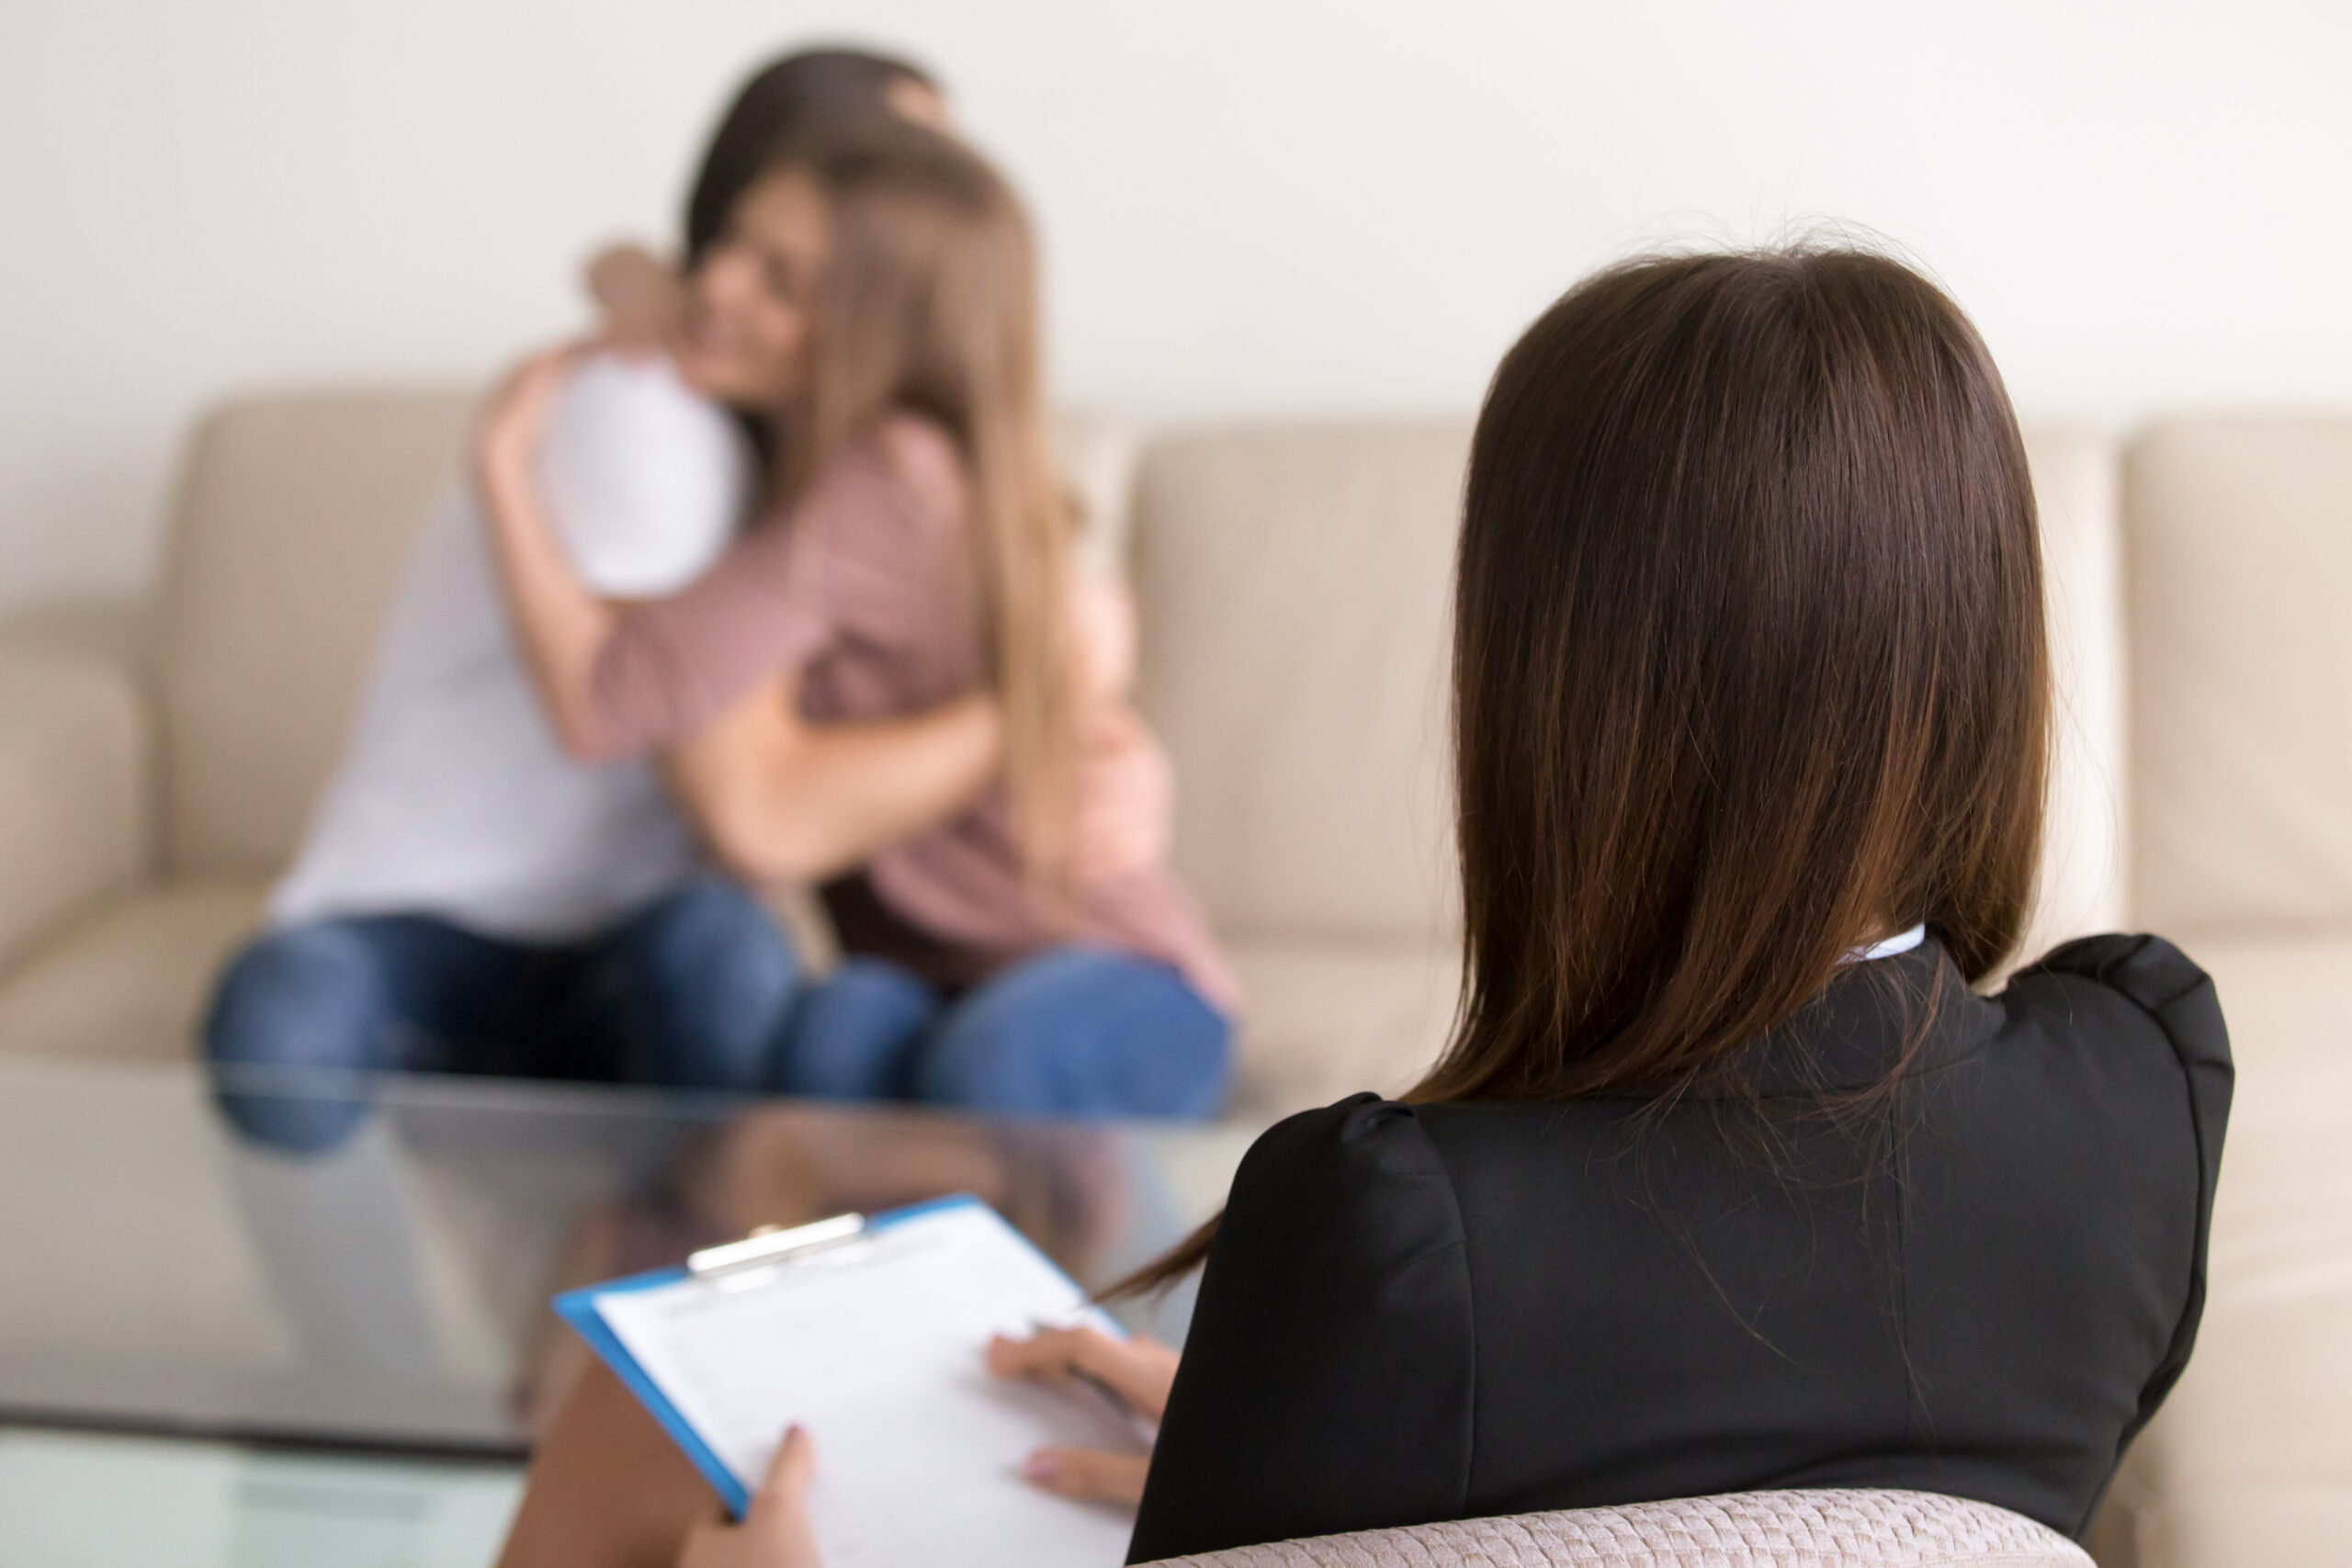 Female psychologist helps a young couple during a therapy session, focusing on relationship issues and eating disorder treatment